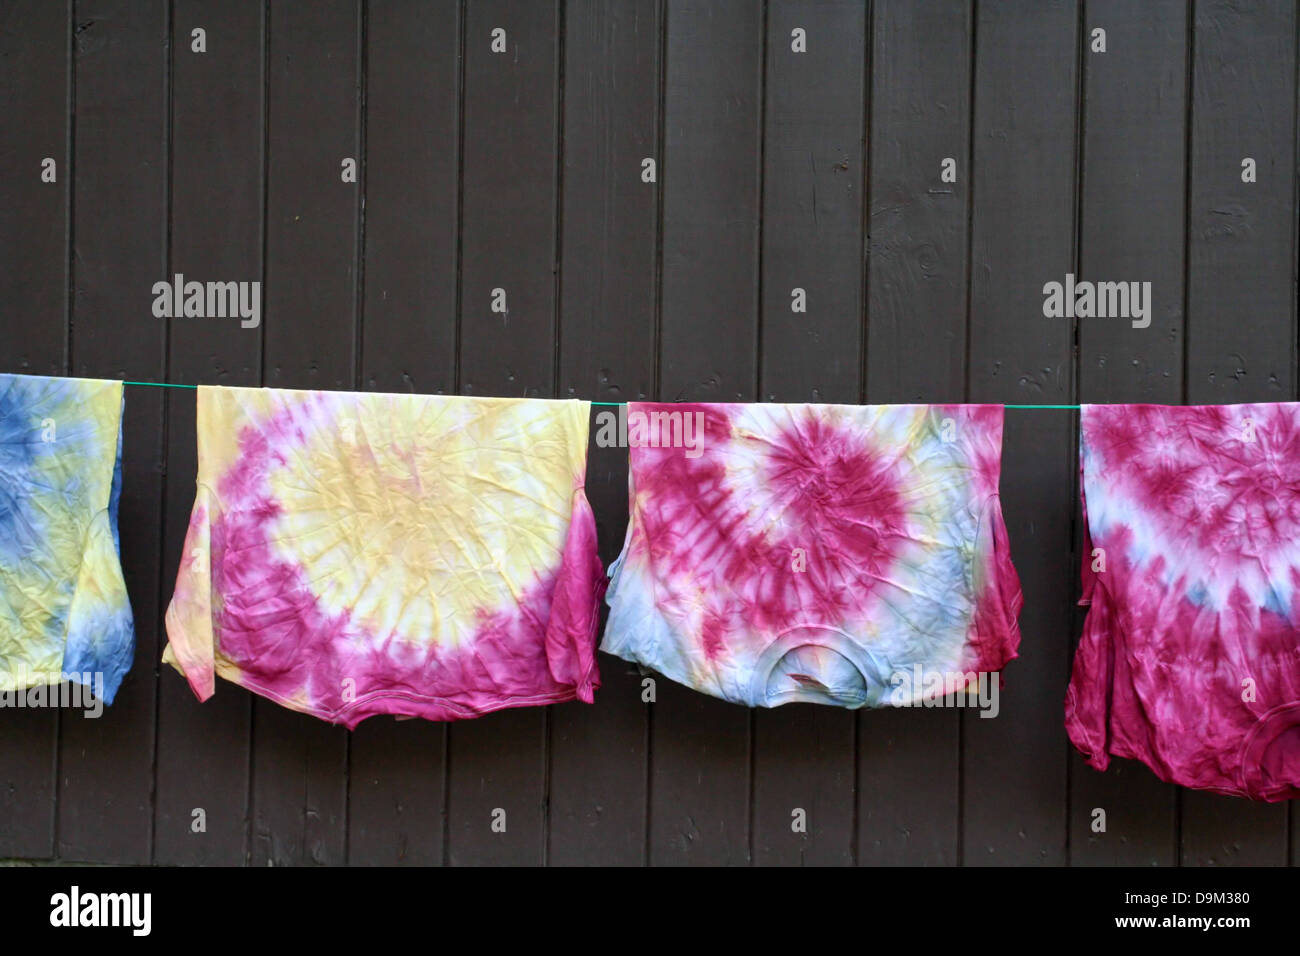 shirts t-shirts tee shirt clothsline rope hanging hang dry colors colored tie dye tie-dye brown wood wall Stock Photo